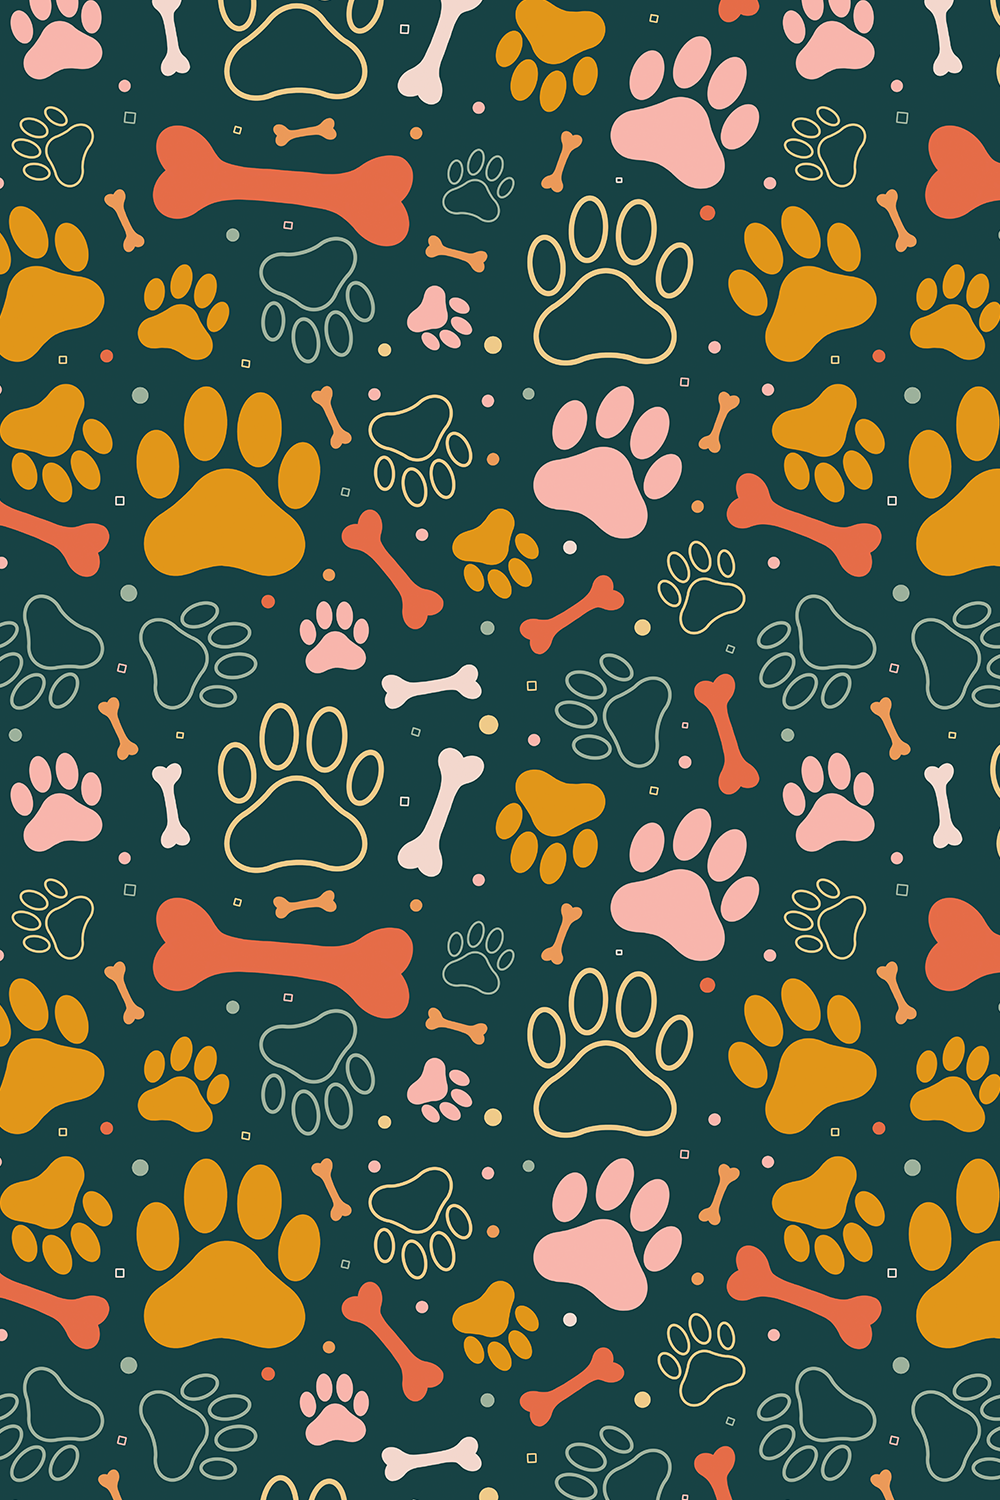 Paw Wallpapers